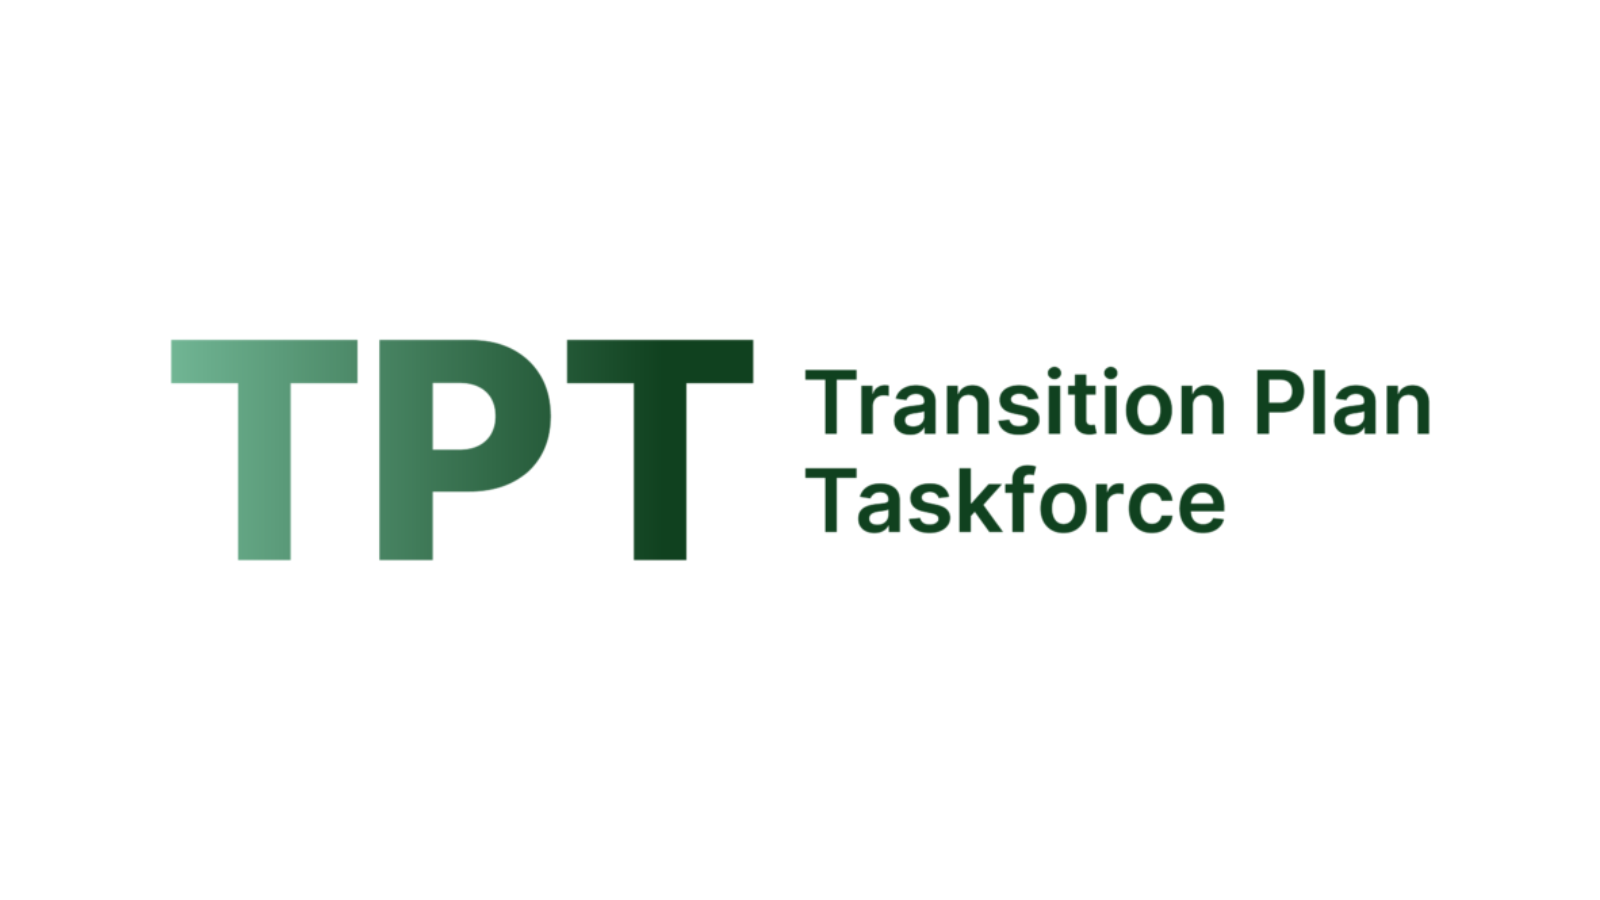 Evening Reception – Hosted by the Transition Plan Taskforce (TPT)